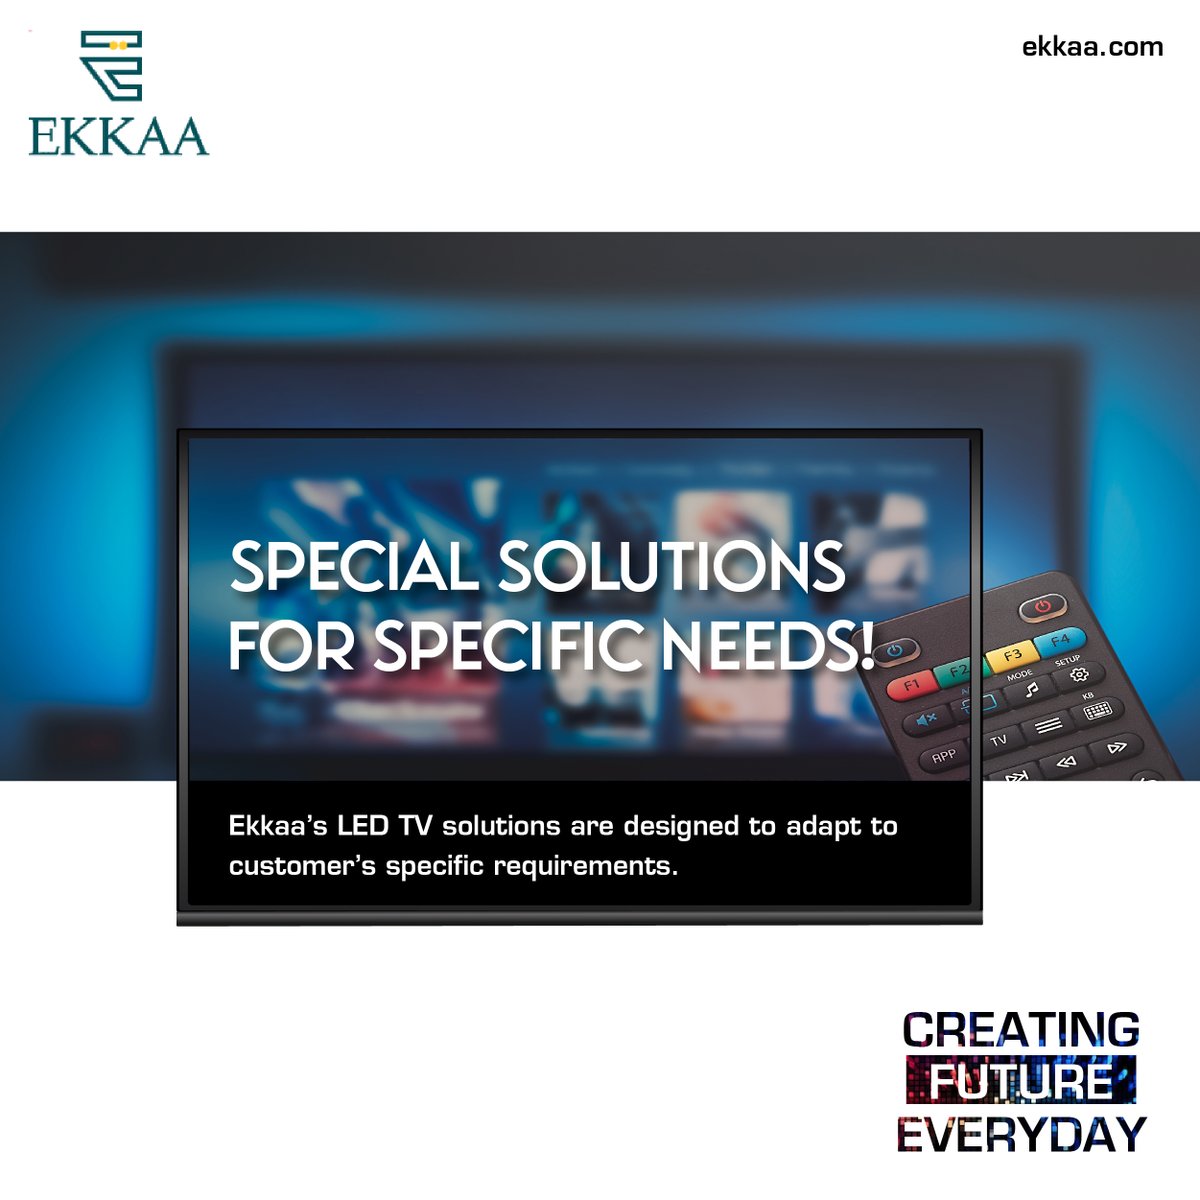 Elevate your brand experience with Ekkaa's LED TVs! Precision-engineered for your unique business needs, these innovative displays captivate audiences. Discover innovation as unique as you are.

#Indians #Manufacturing #LEDTV